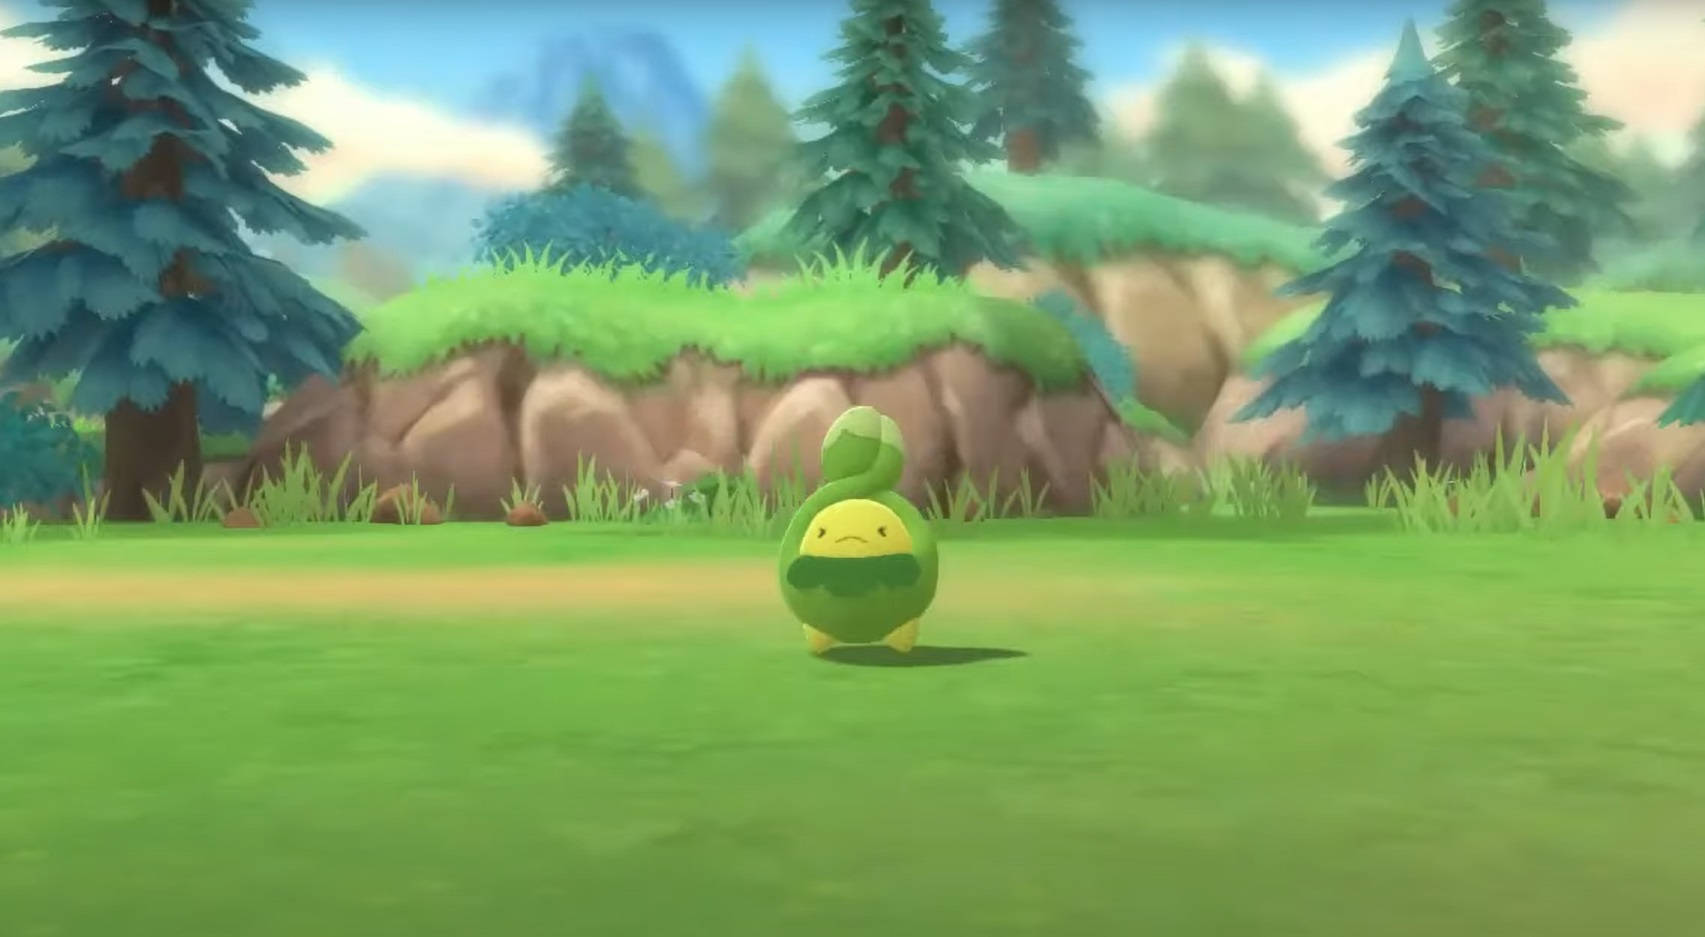 Budew In The Middle Of Grass Field Wallpaper